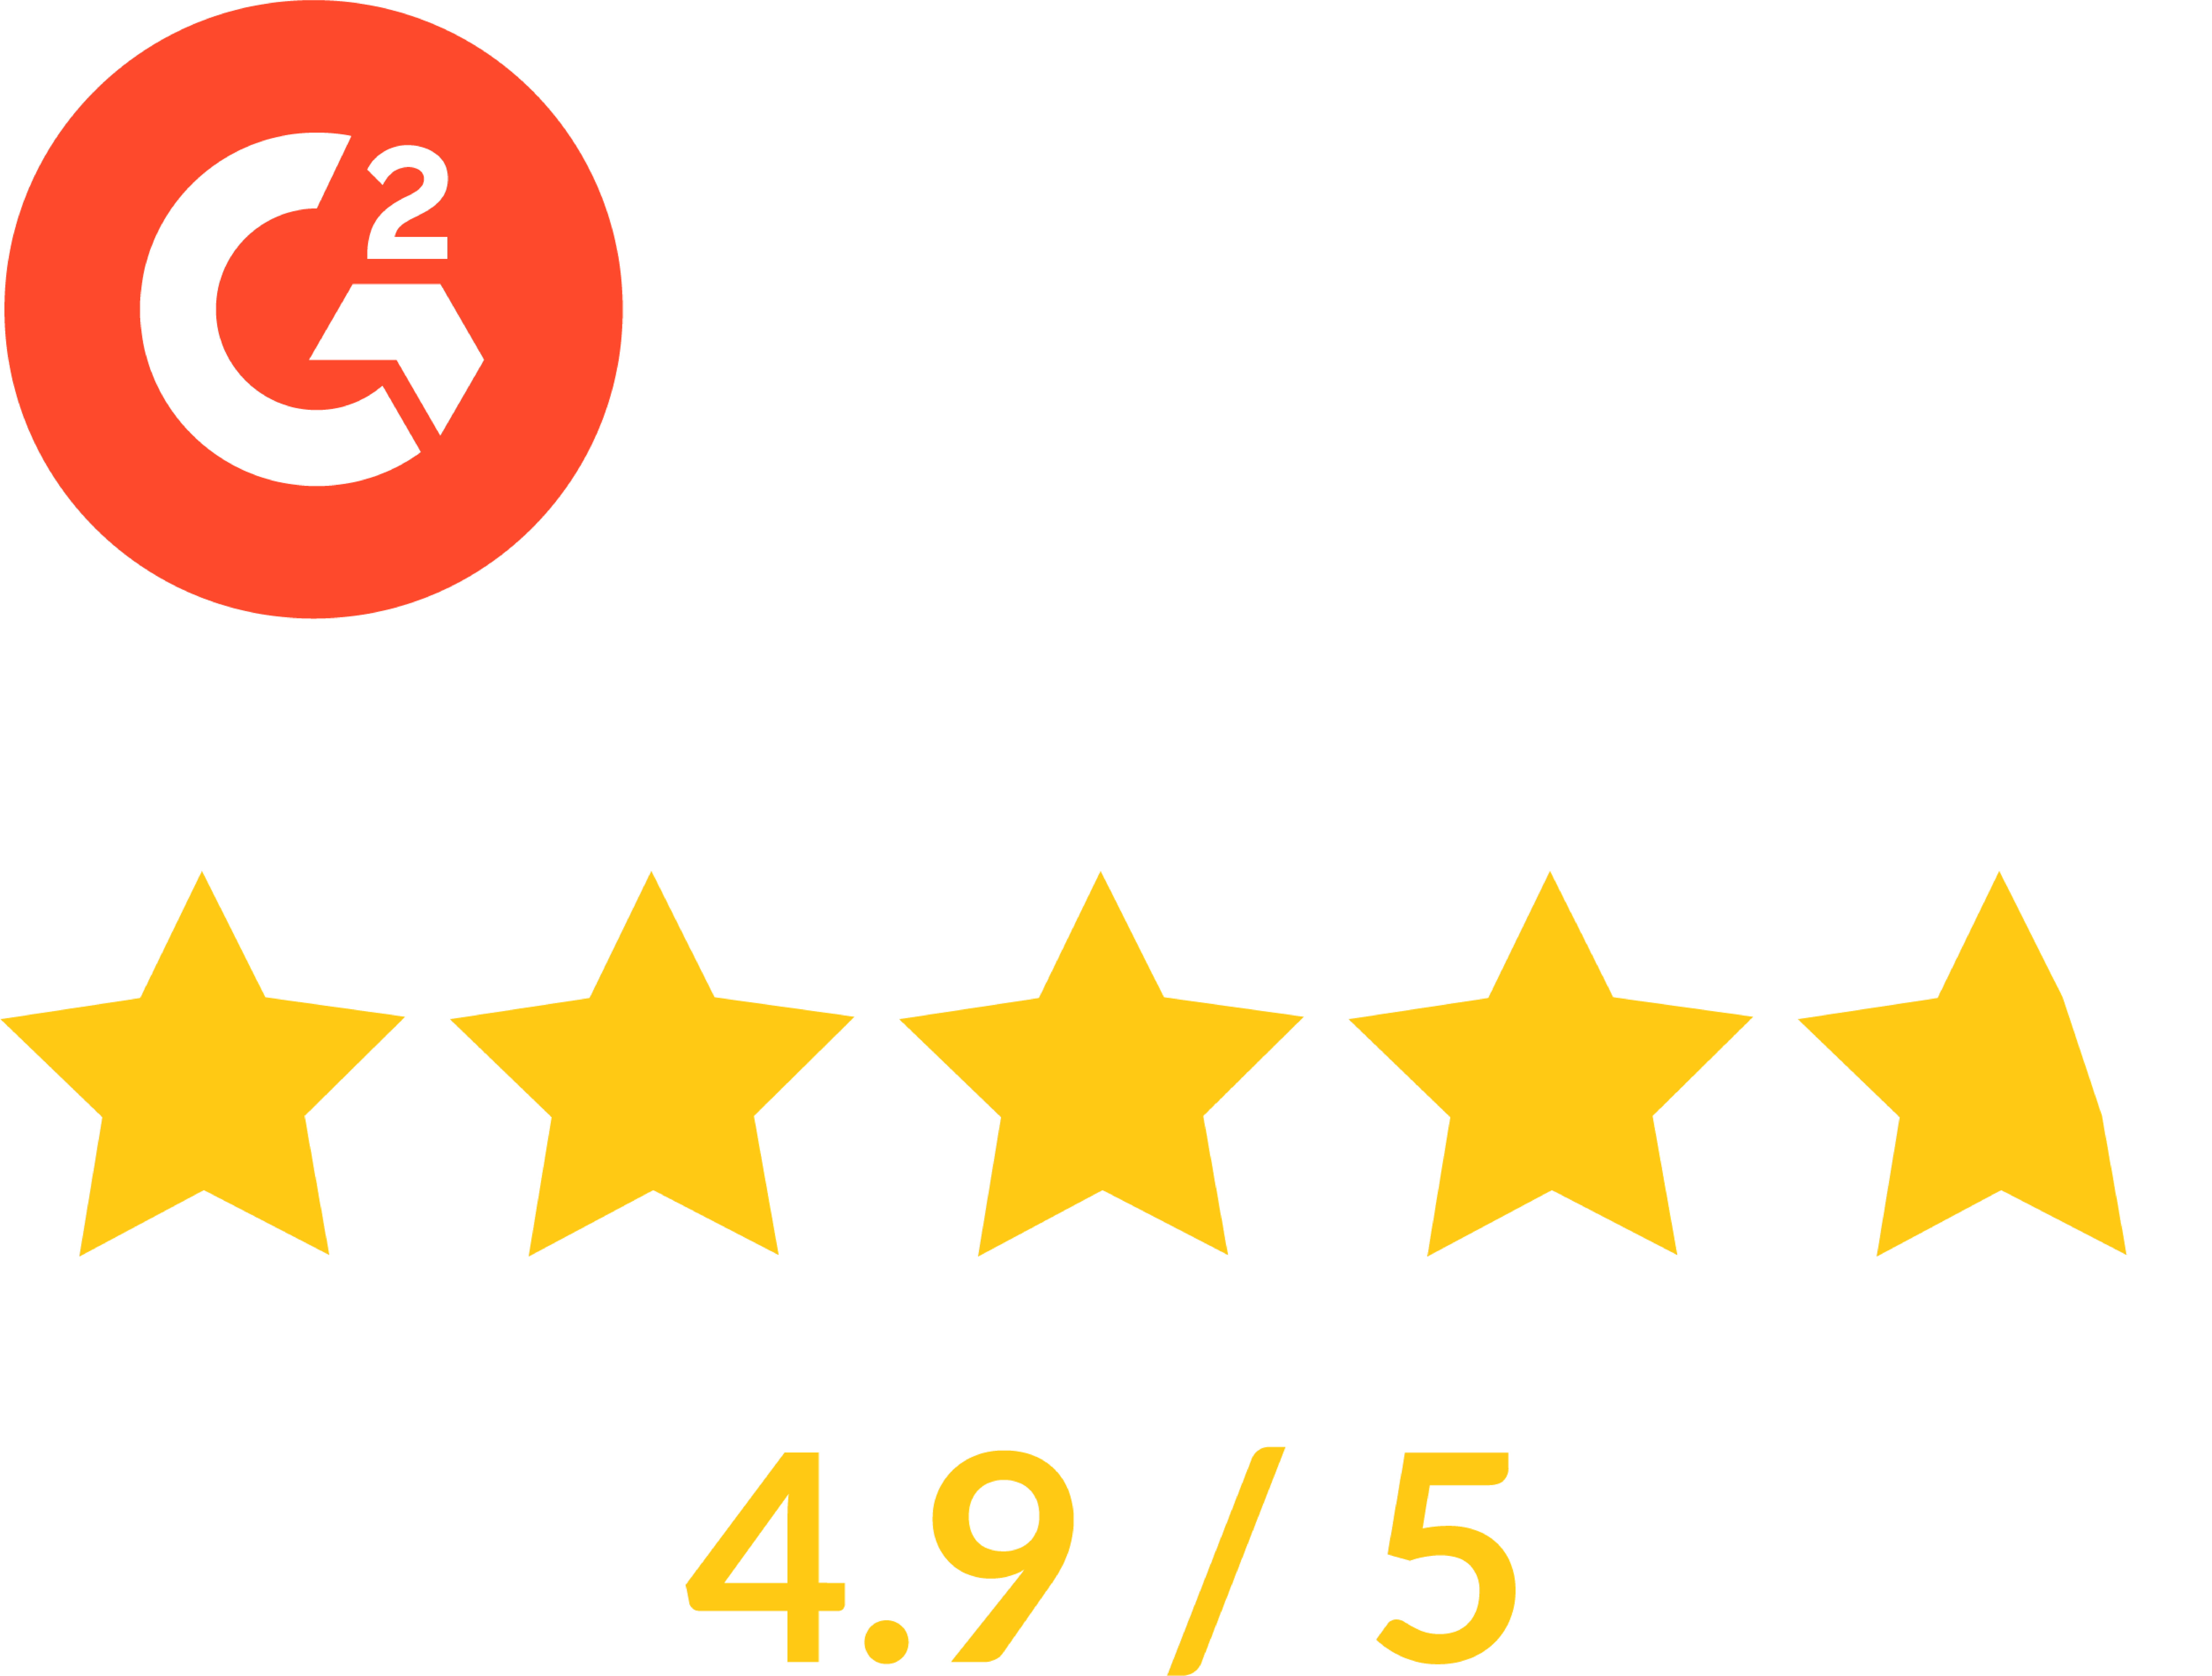 G2 rating